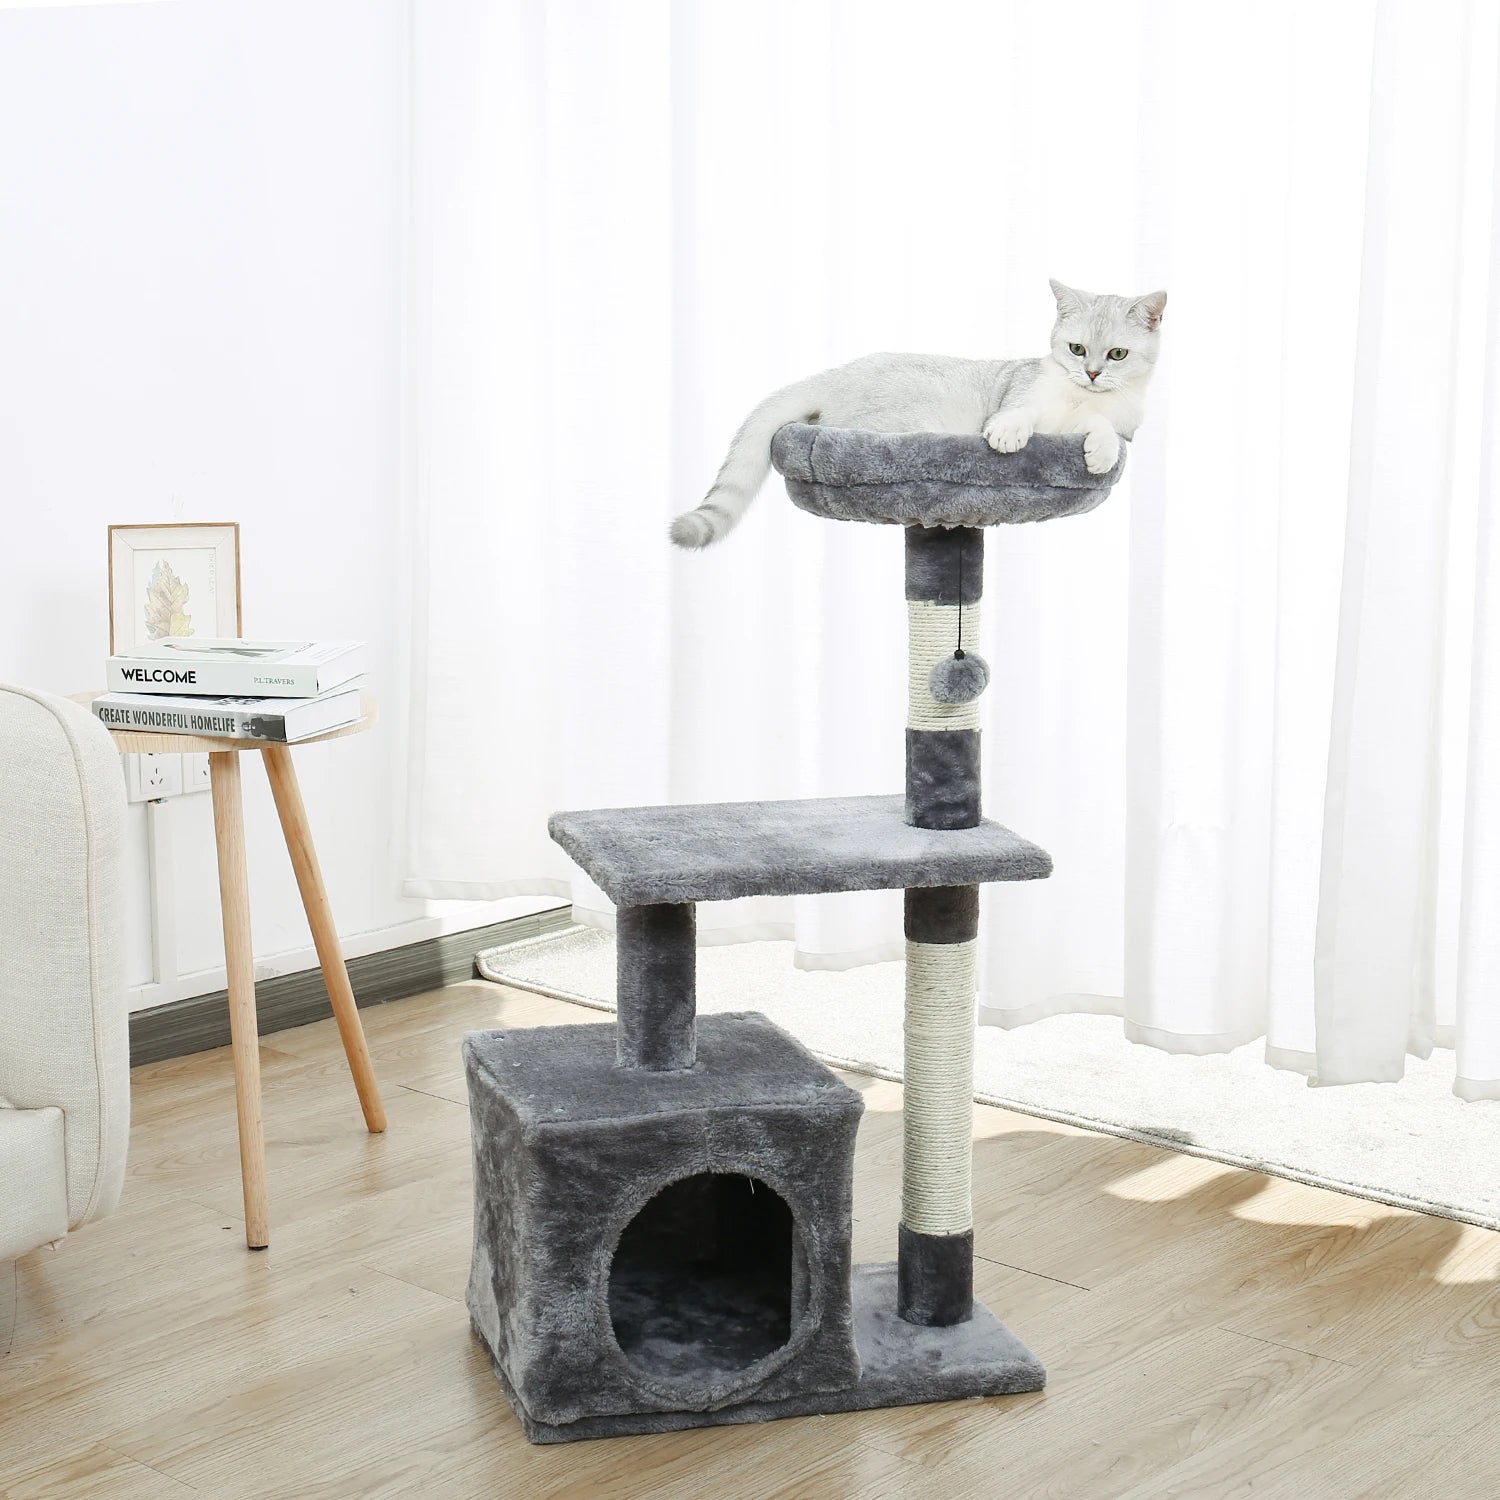 Pet Cat Jumping Toy with Ladder Scratching Wood Climbing Tree for Cat Climbing Frame Cat Furniture Scratching Post #0201